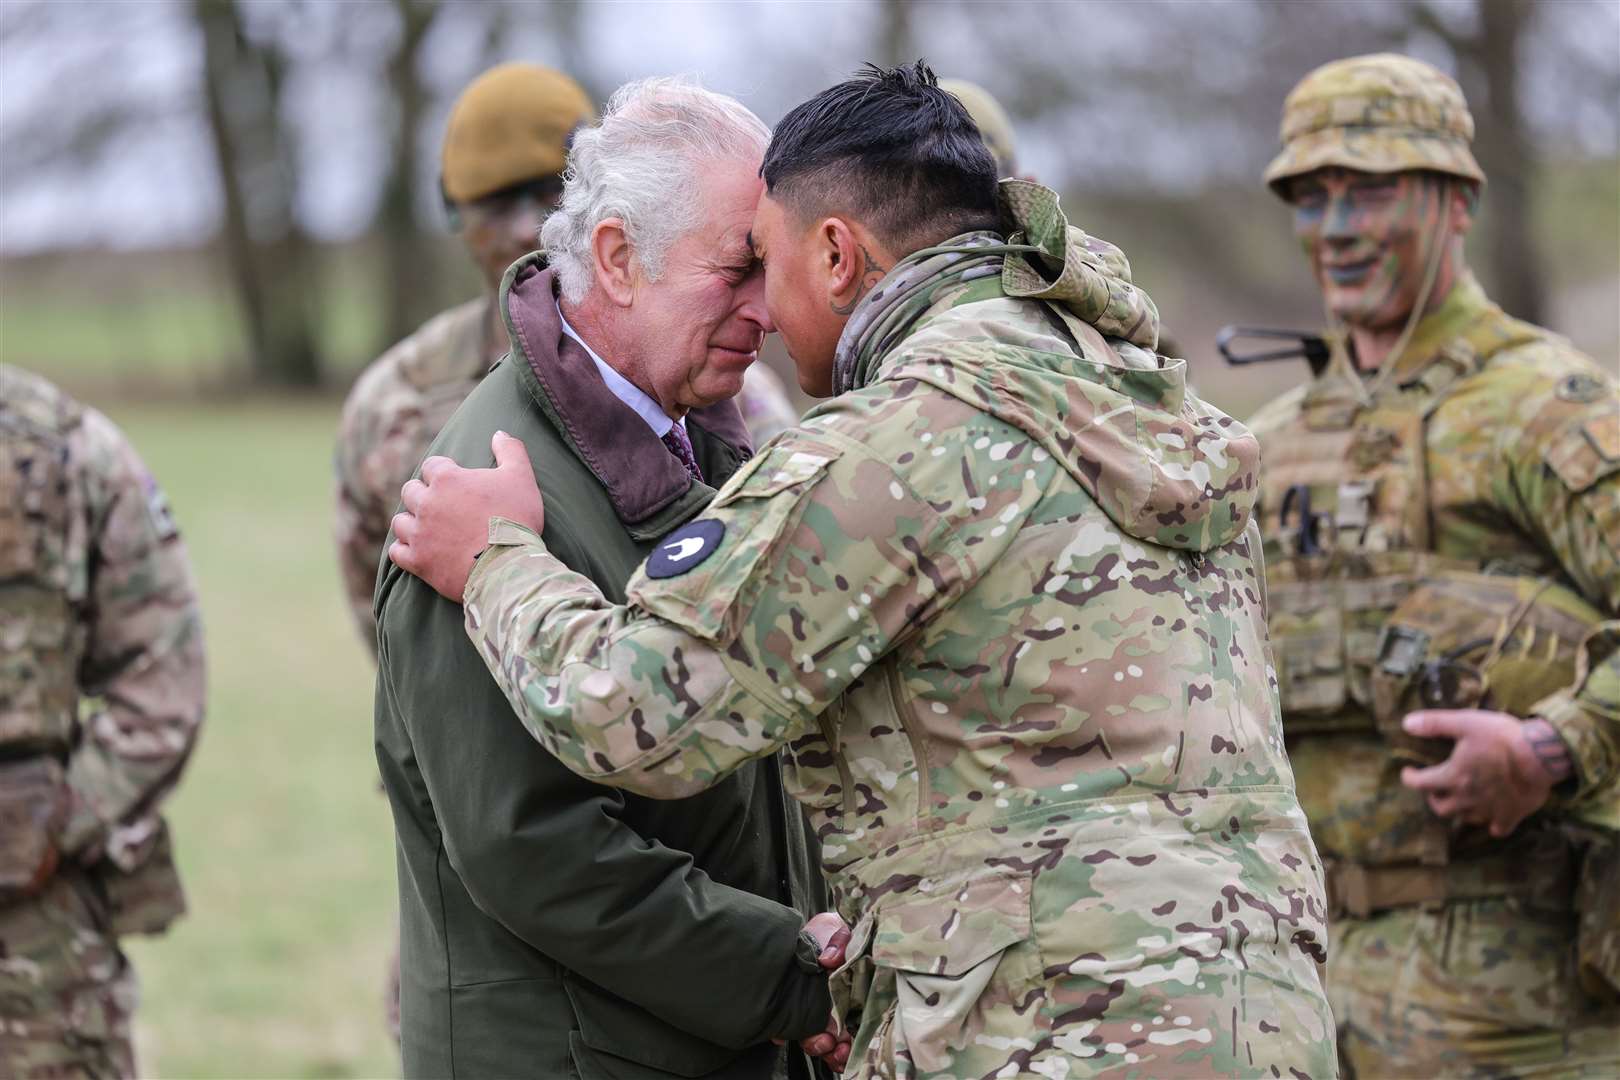 The King receives the hongi – the traditional Maori greeting – from a New Zealander who is part of the Ukrainian contingent during a visit to a training site in Wiltshire (Chris Jackson/PA)